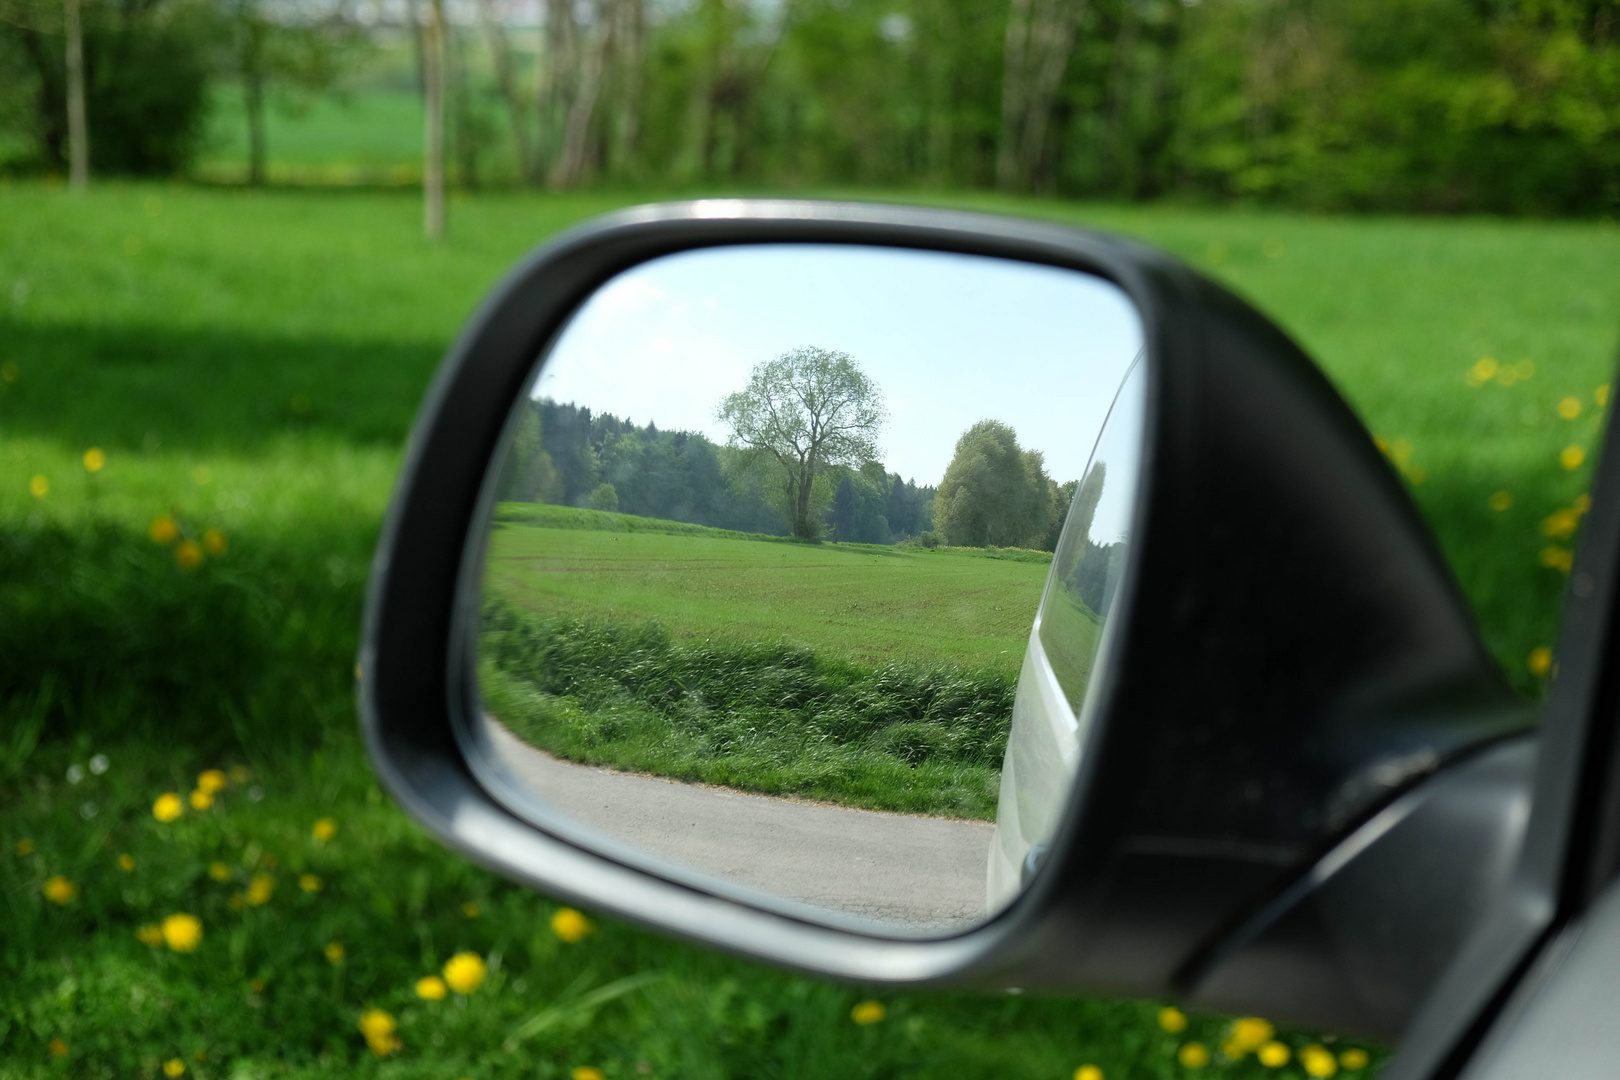 Objects in the rear view mirror...